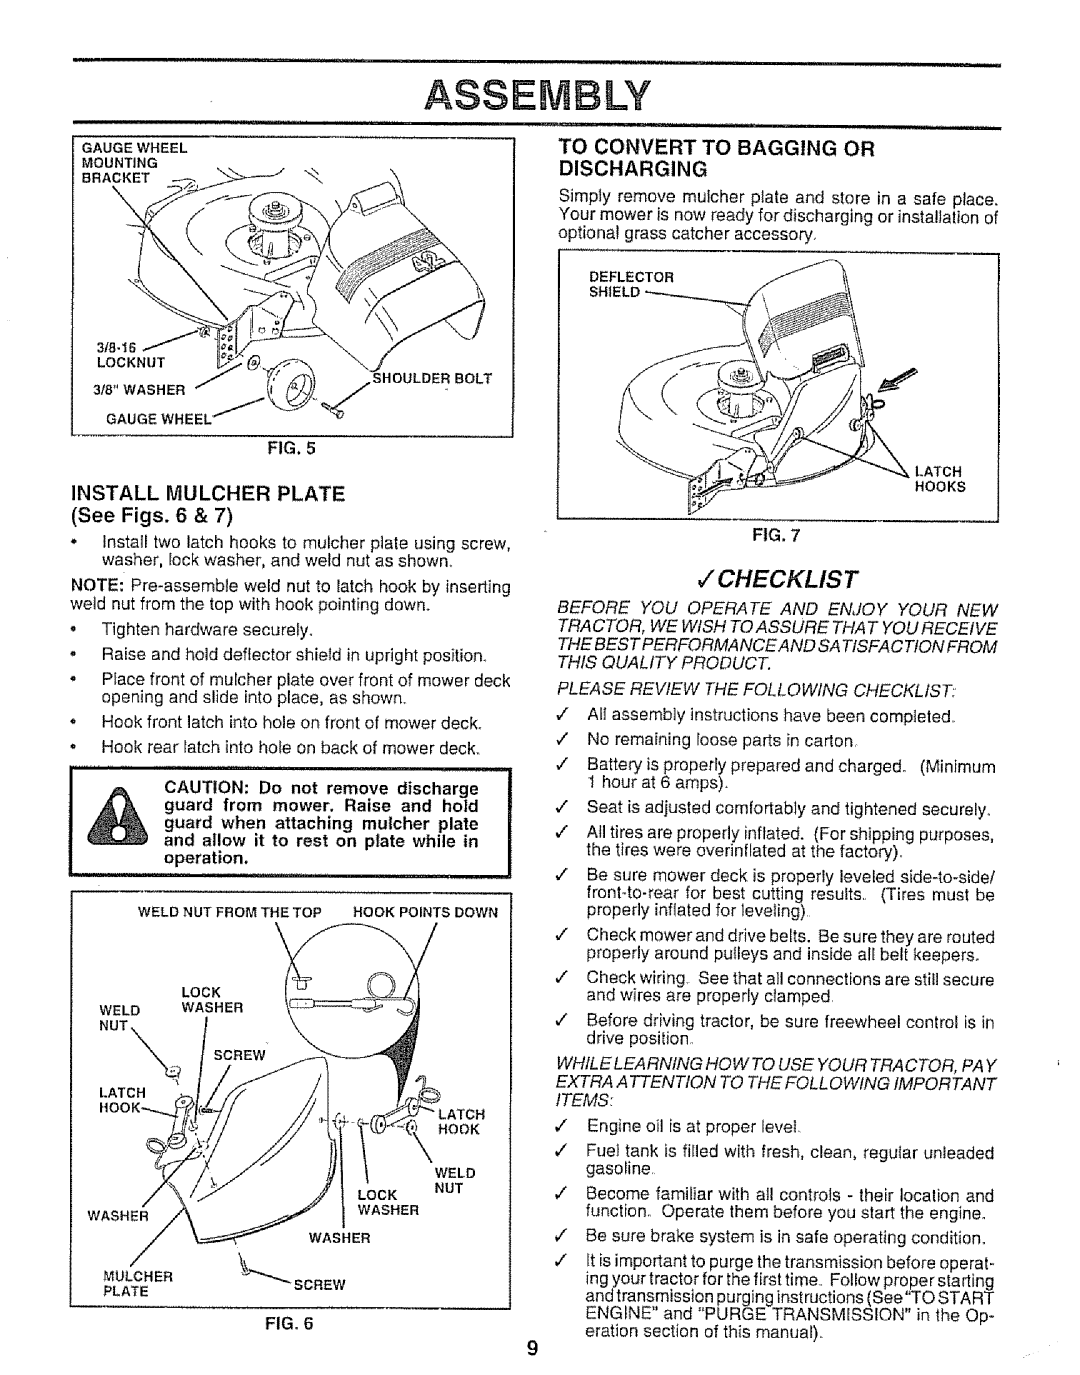 Sears 917.25953 owner manual 7CHECKLIST, INSTALL MULCHER PLATE See Figs. 6, To Convert To Bagging Or, Discharging 